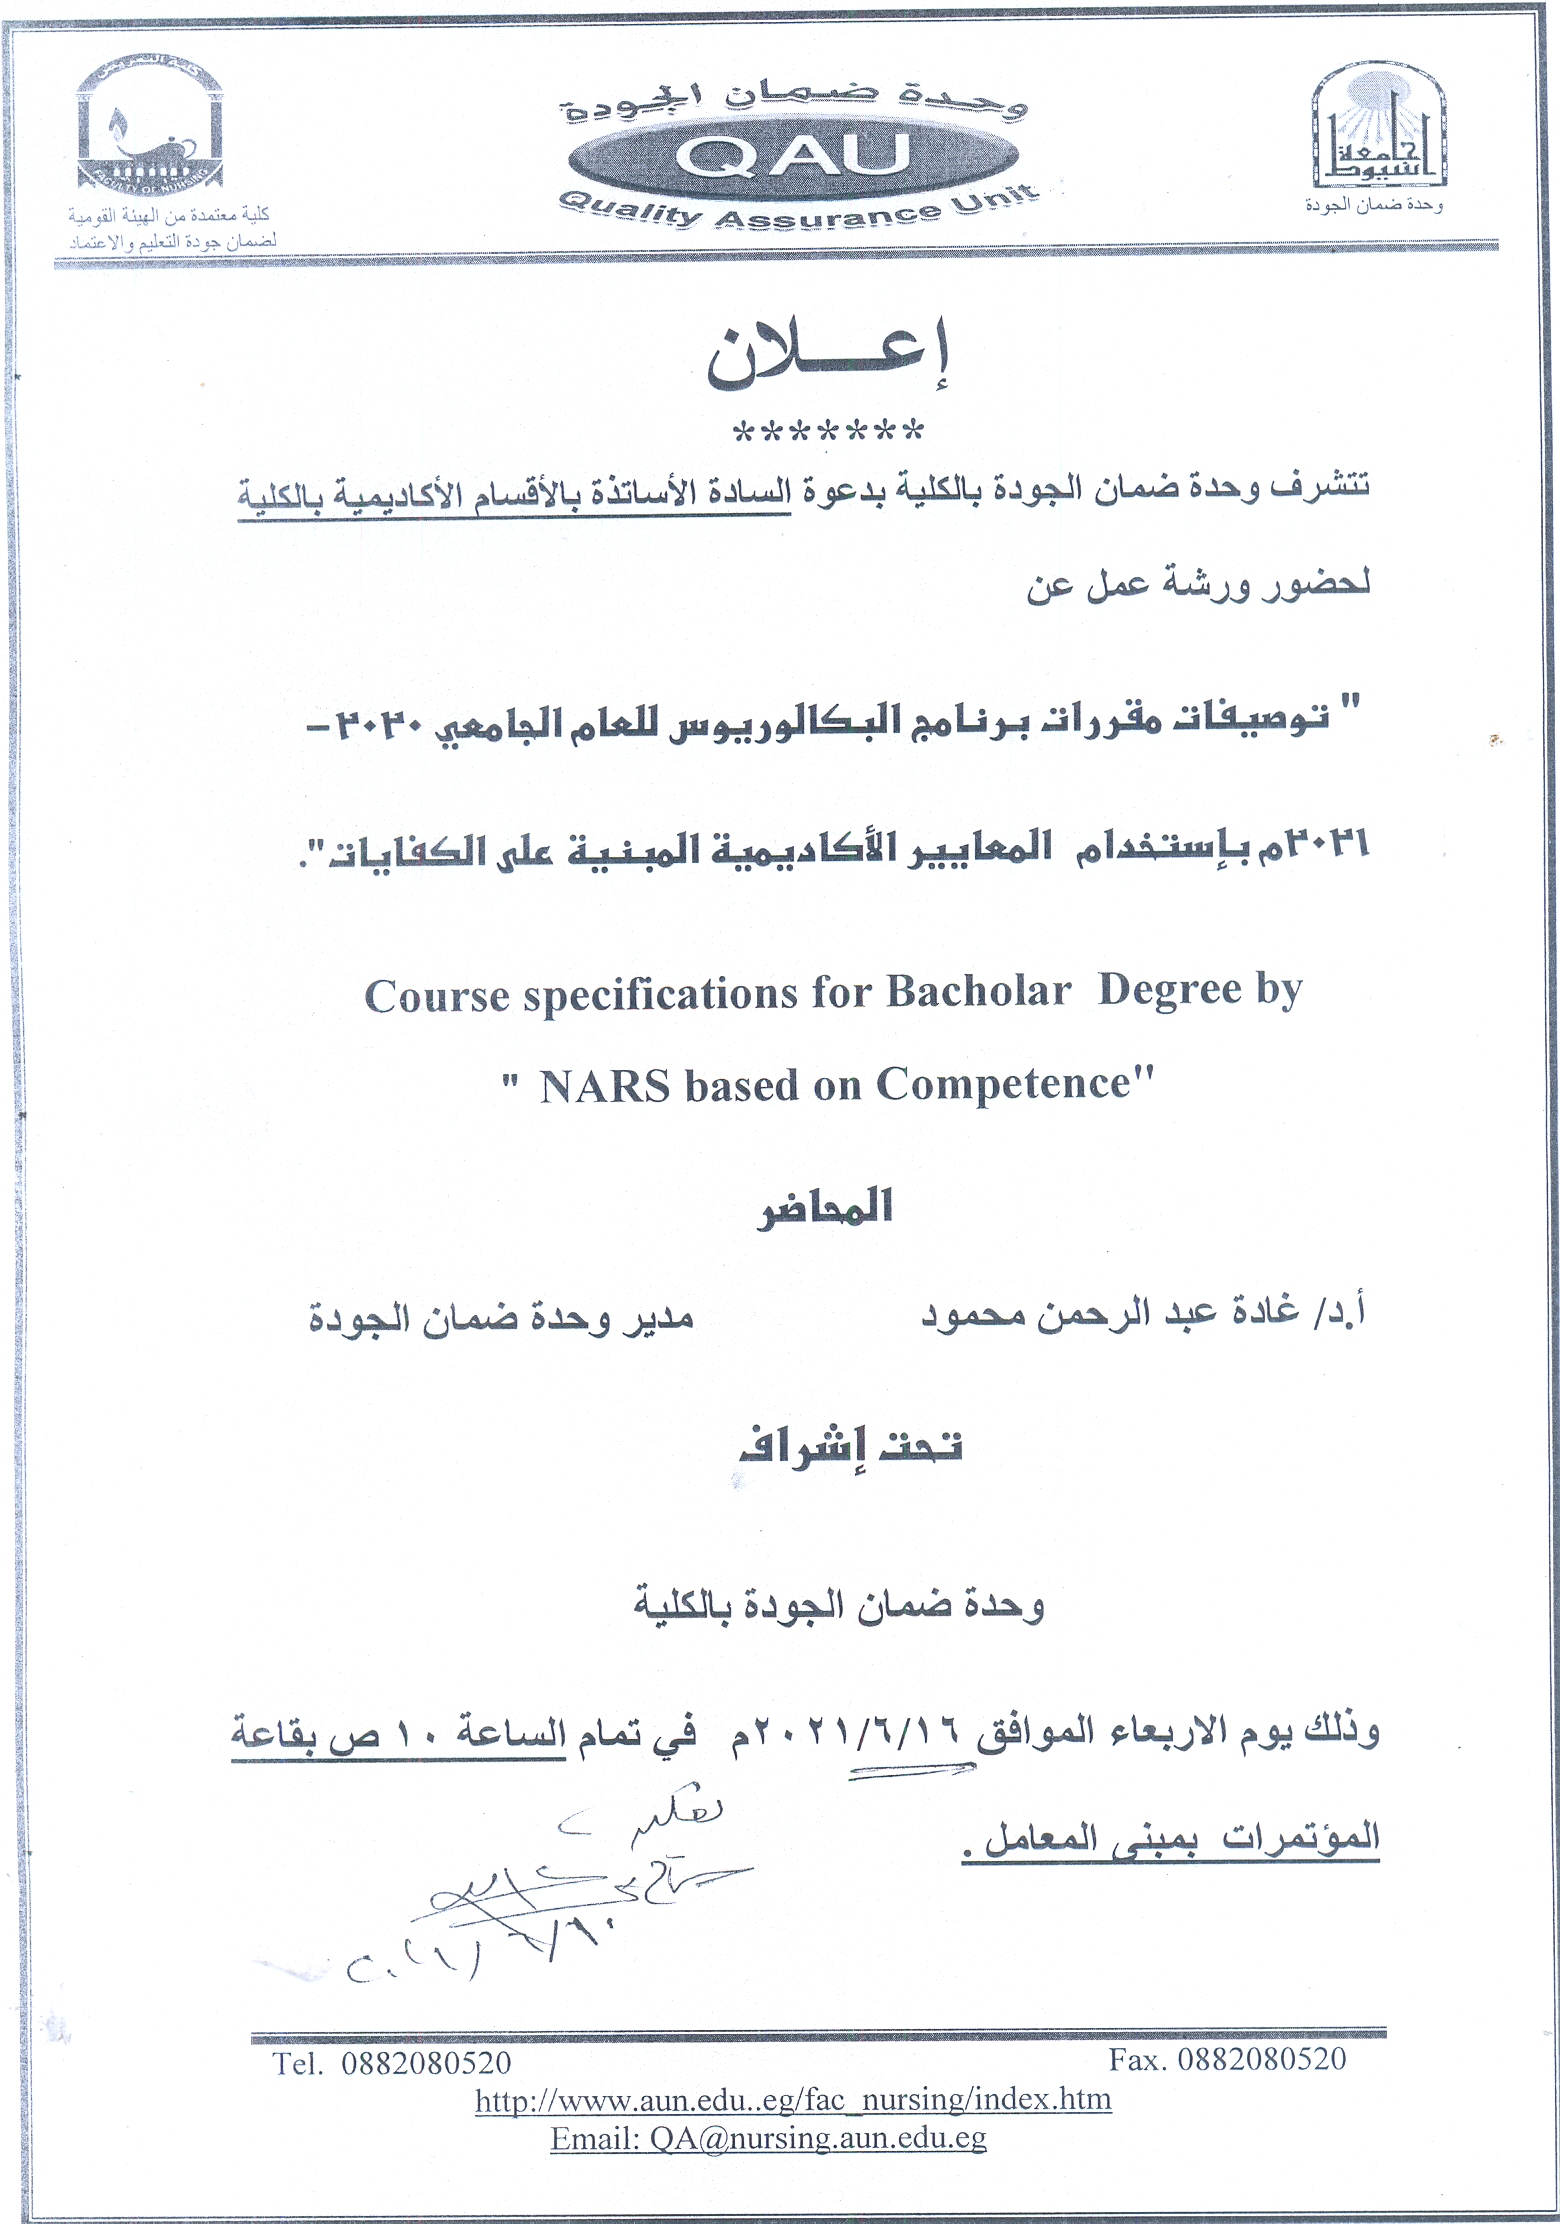 Announcement to attend a workshop on descriptions of undergraduate courses for the academic year 2020-2021 using academic standards based on competencies